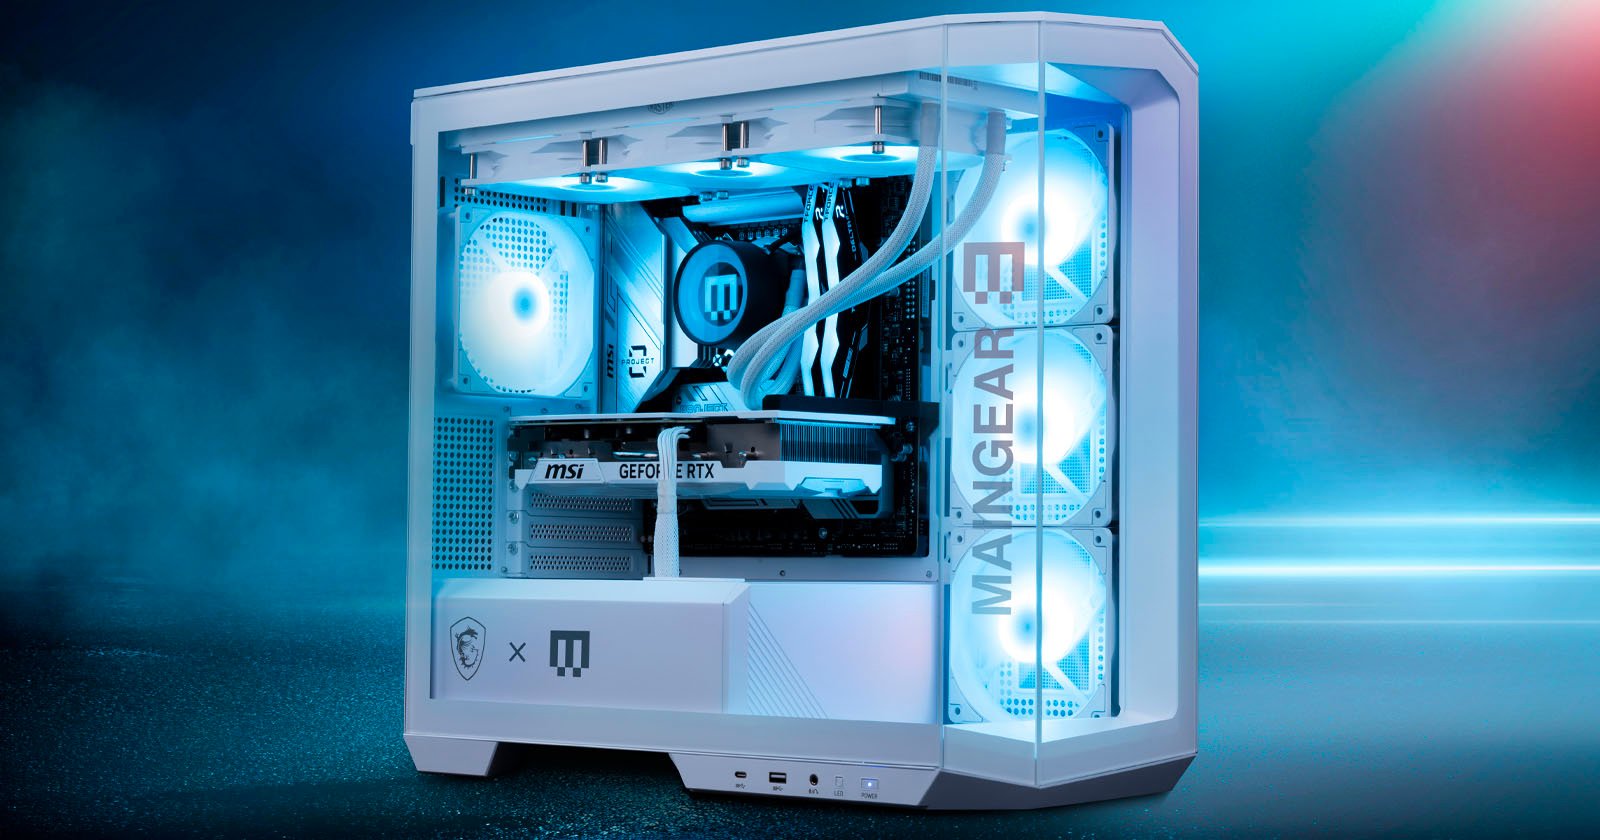 MainGear and MSI Partnered to Make a Gorgeous Limited Edition Pre-Built PC